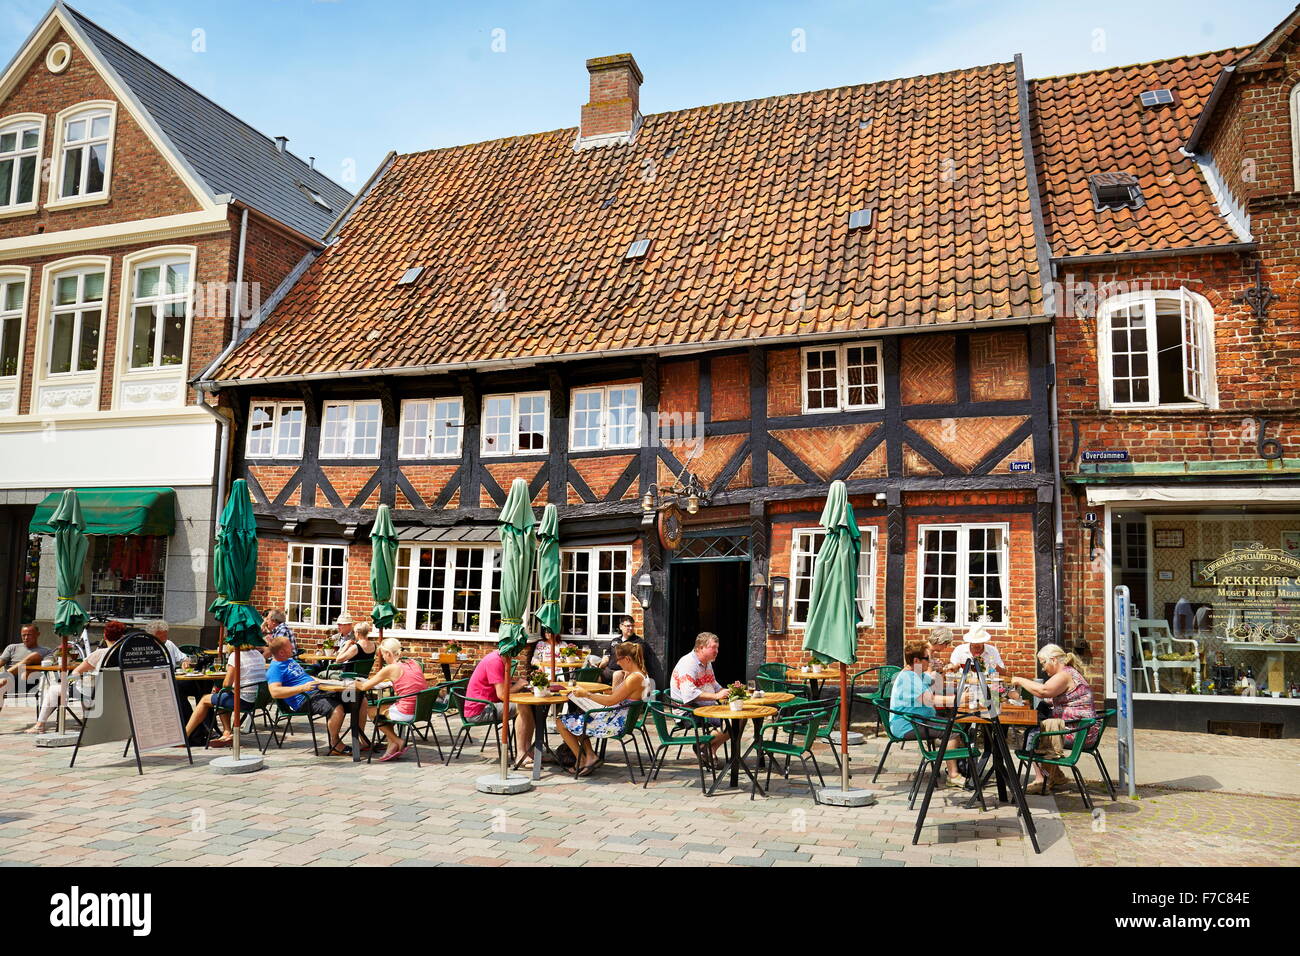 Half-timbered house, Old Town, Ribe, Denmark Stock Photo